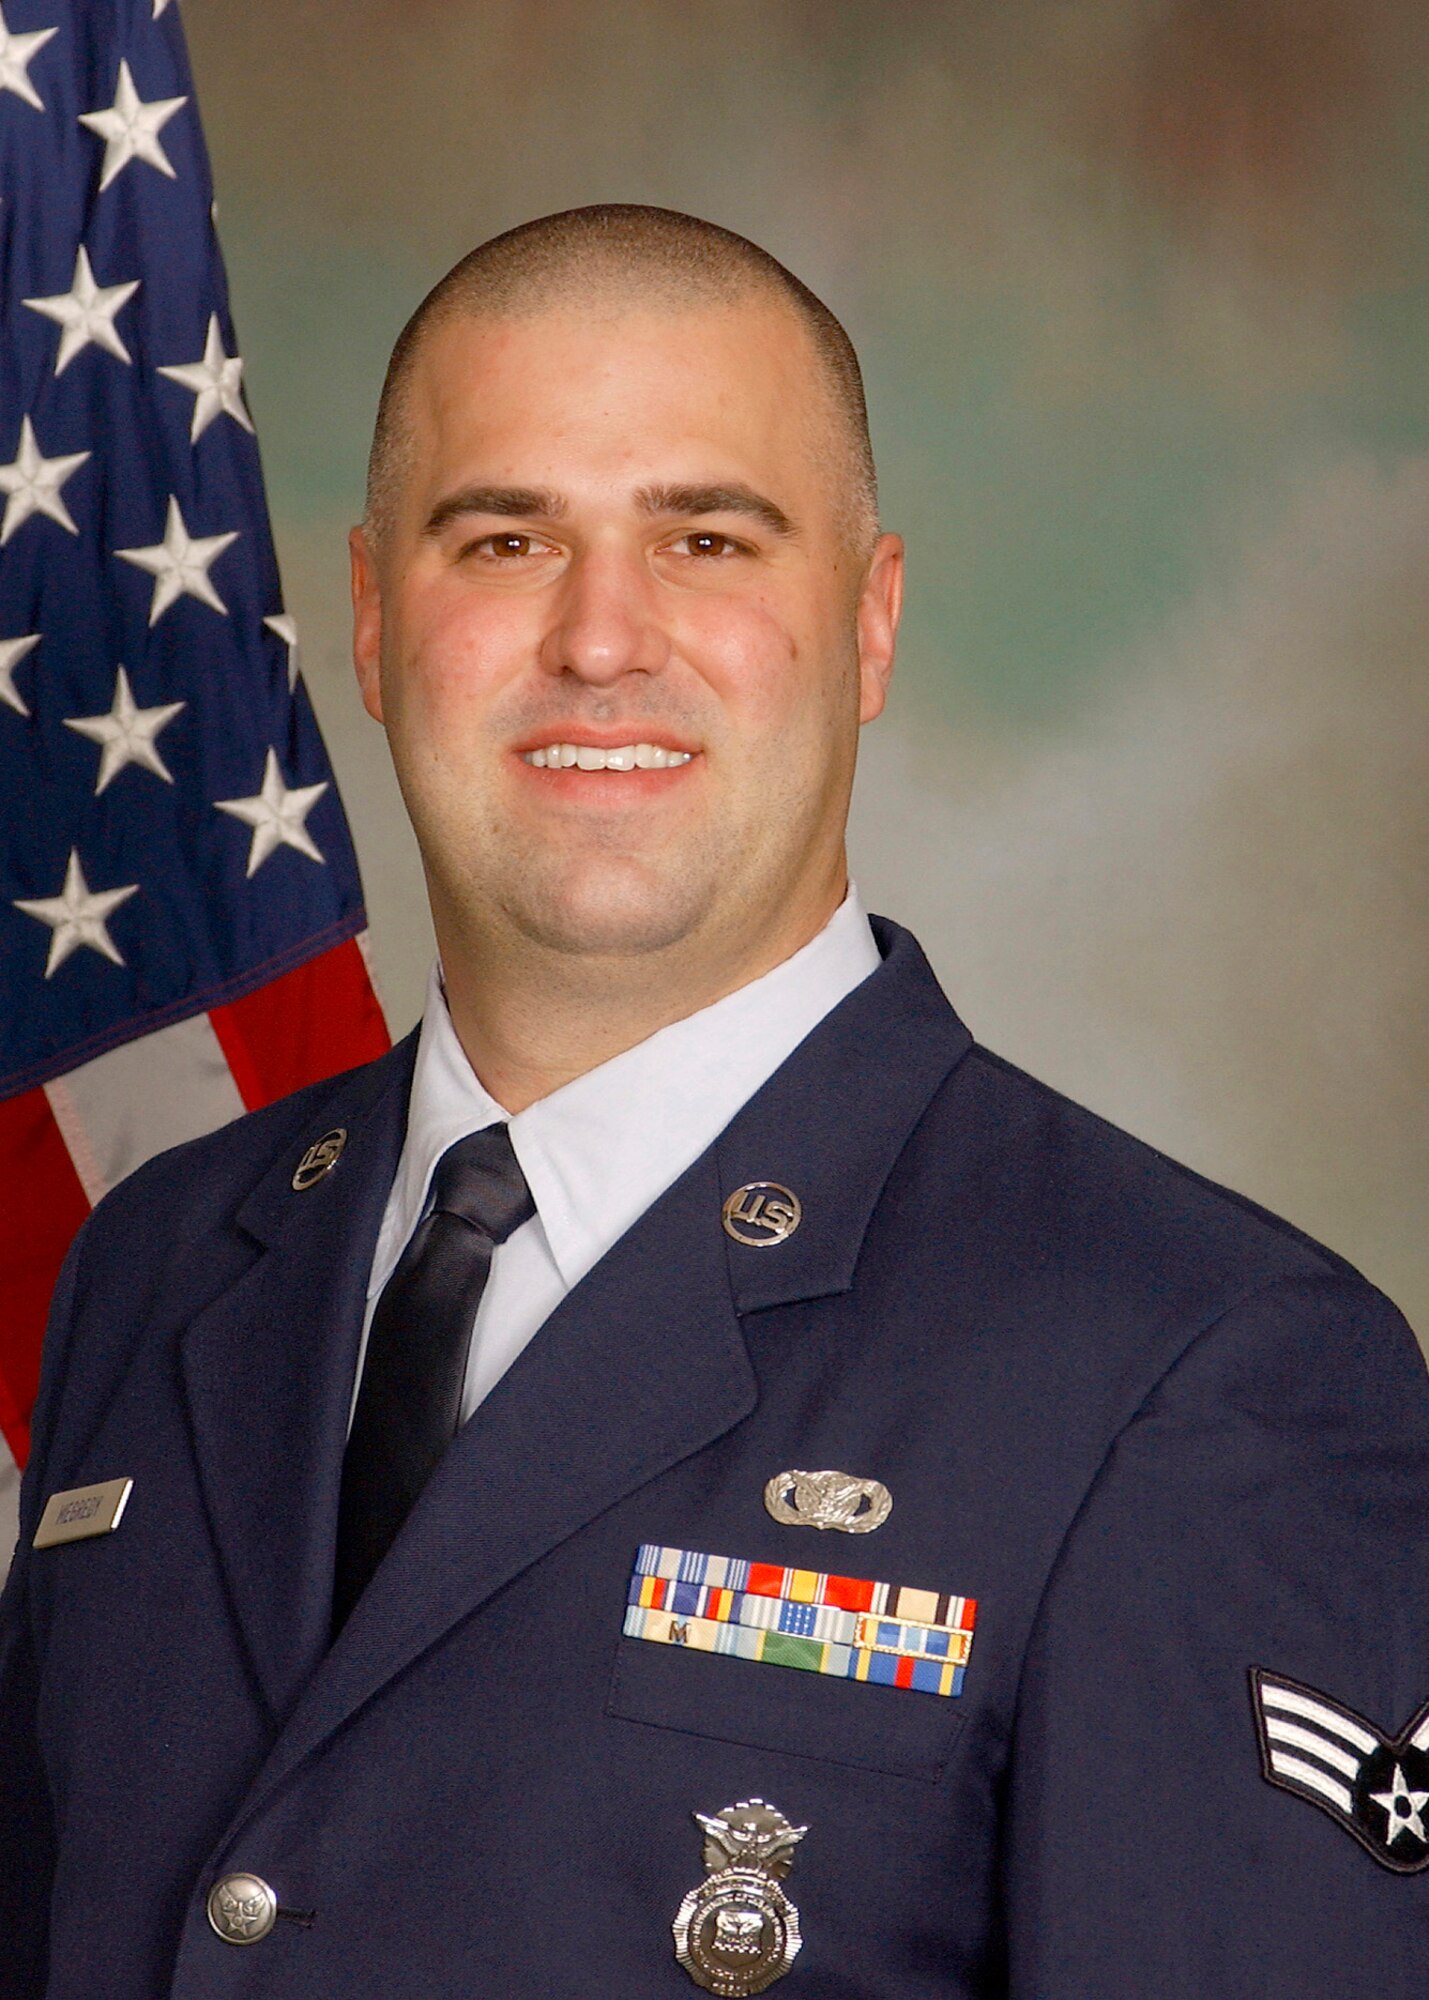 Senior Airman Ryan H. Megredy won for the Airman of the Year category.